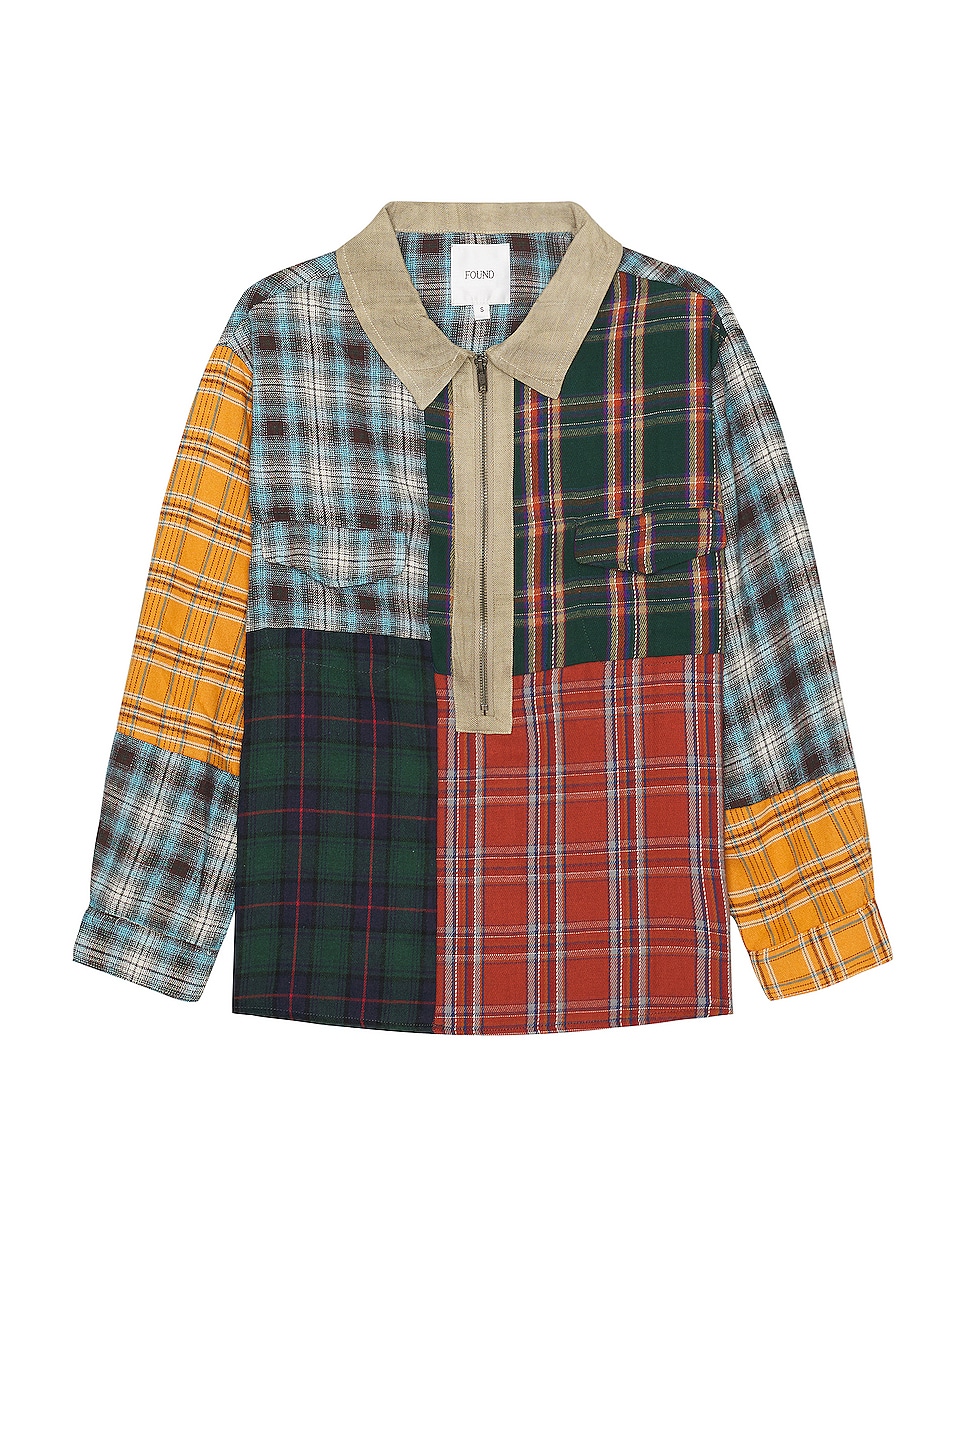 Image 1 of Found Multi Plaid Zip Up Shirt in Multi